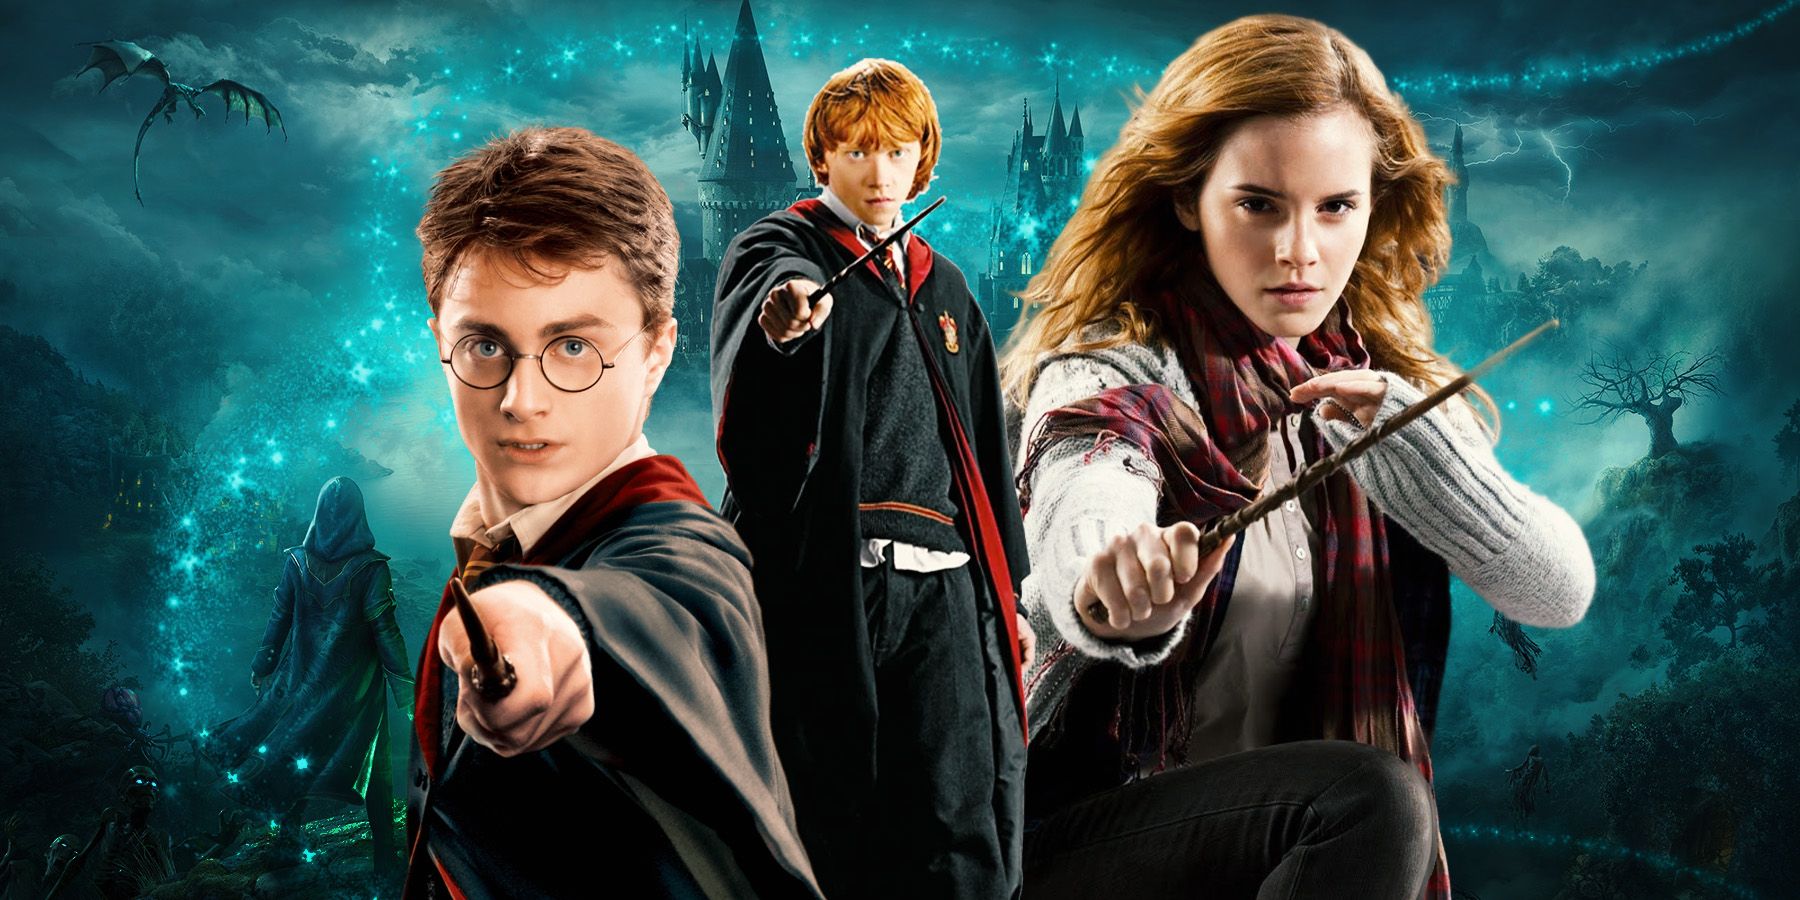 Hogwarts Legacy background with Harry, Ron and Hermione from the Harry Potter movies